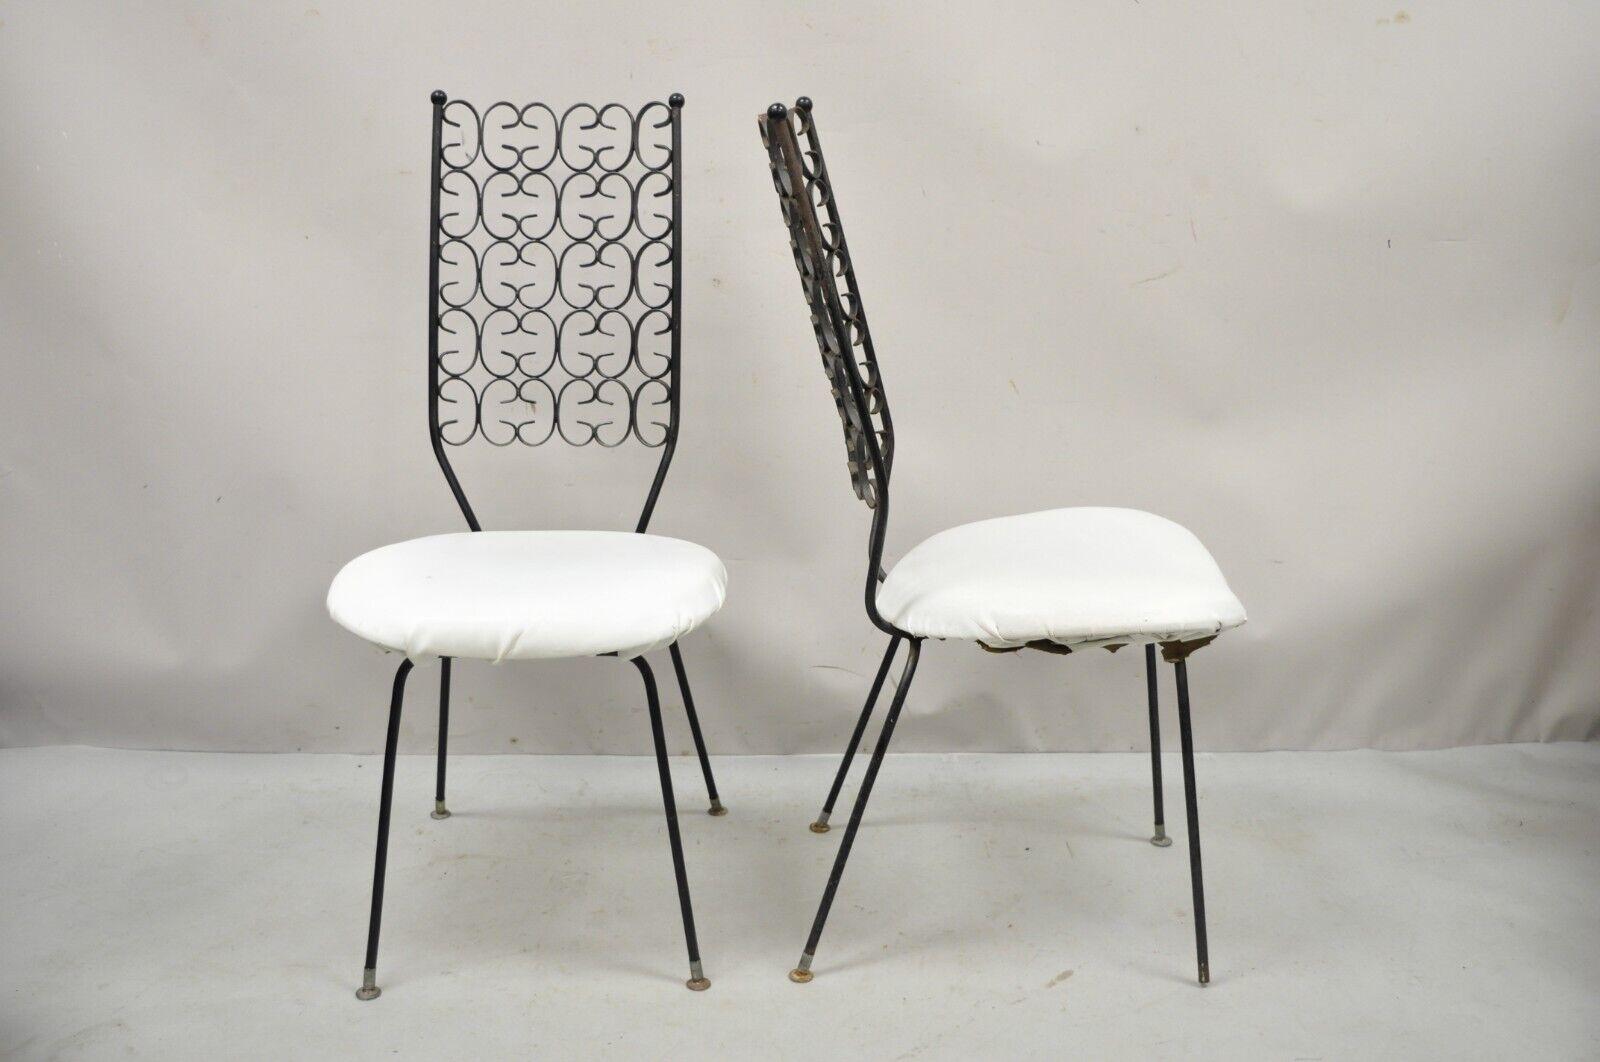 Vintage Salterini Umanoff Style Iron Scroll Dining Side Chairs - a Pair. Item features wrought Iron frame, scroll design back, great style and form. Circa mid 20th century. Measurements: 39